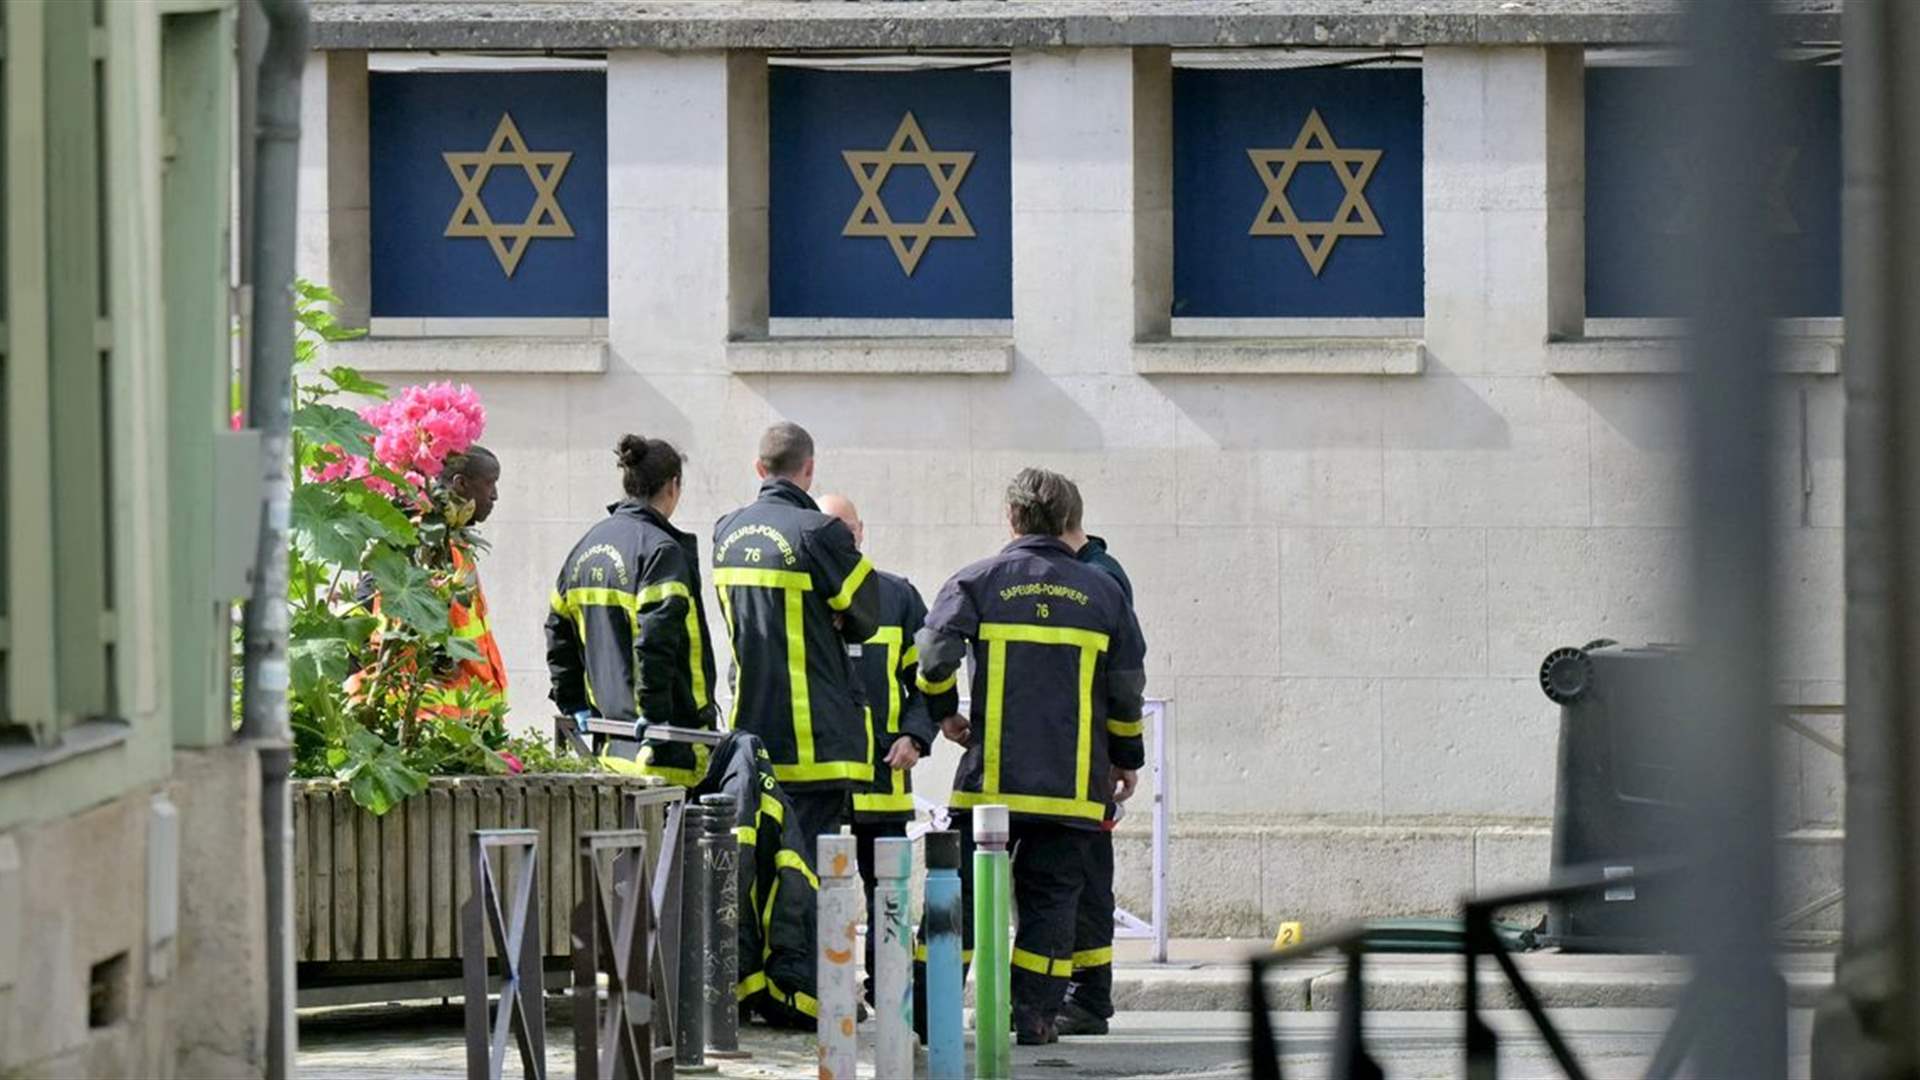 French Interior Minister: The person who set fire to the synagogue in Rouen is of Algerian origin